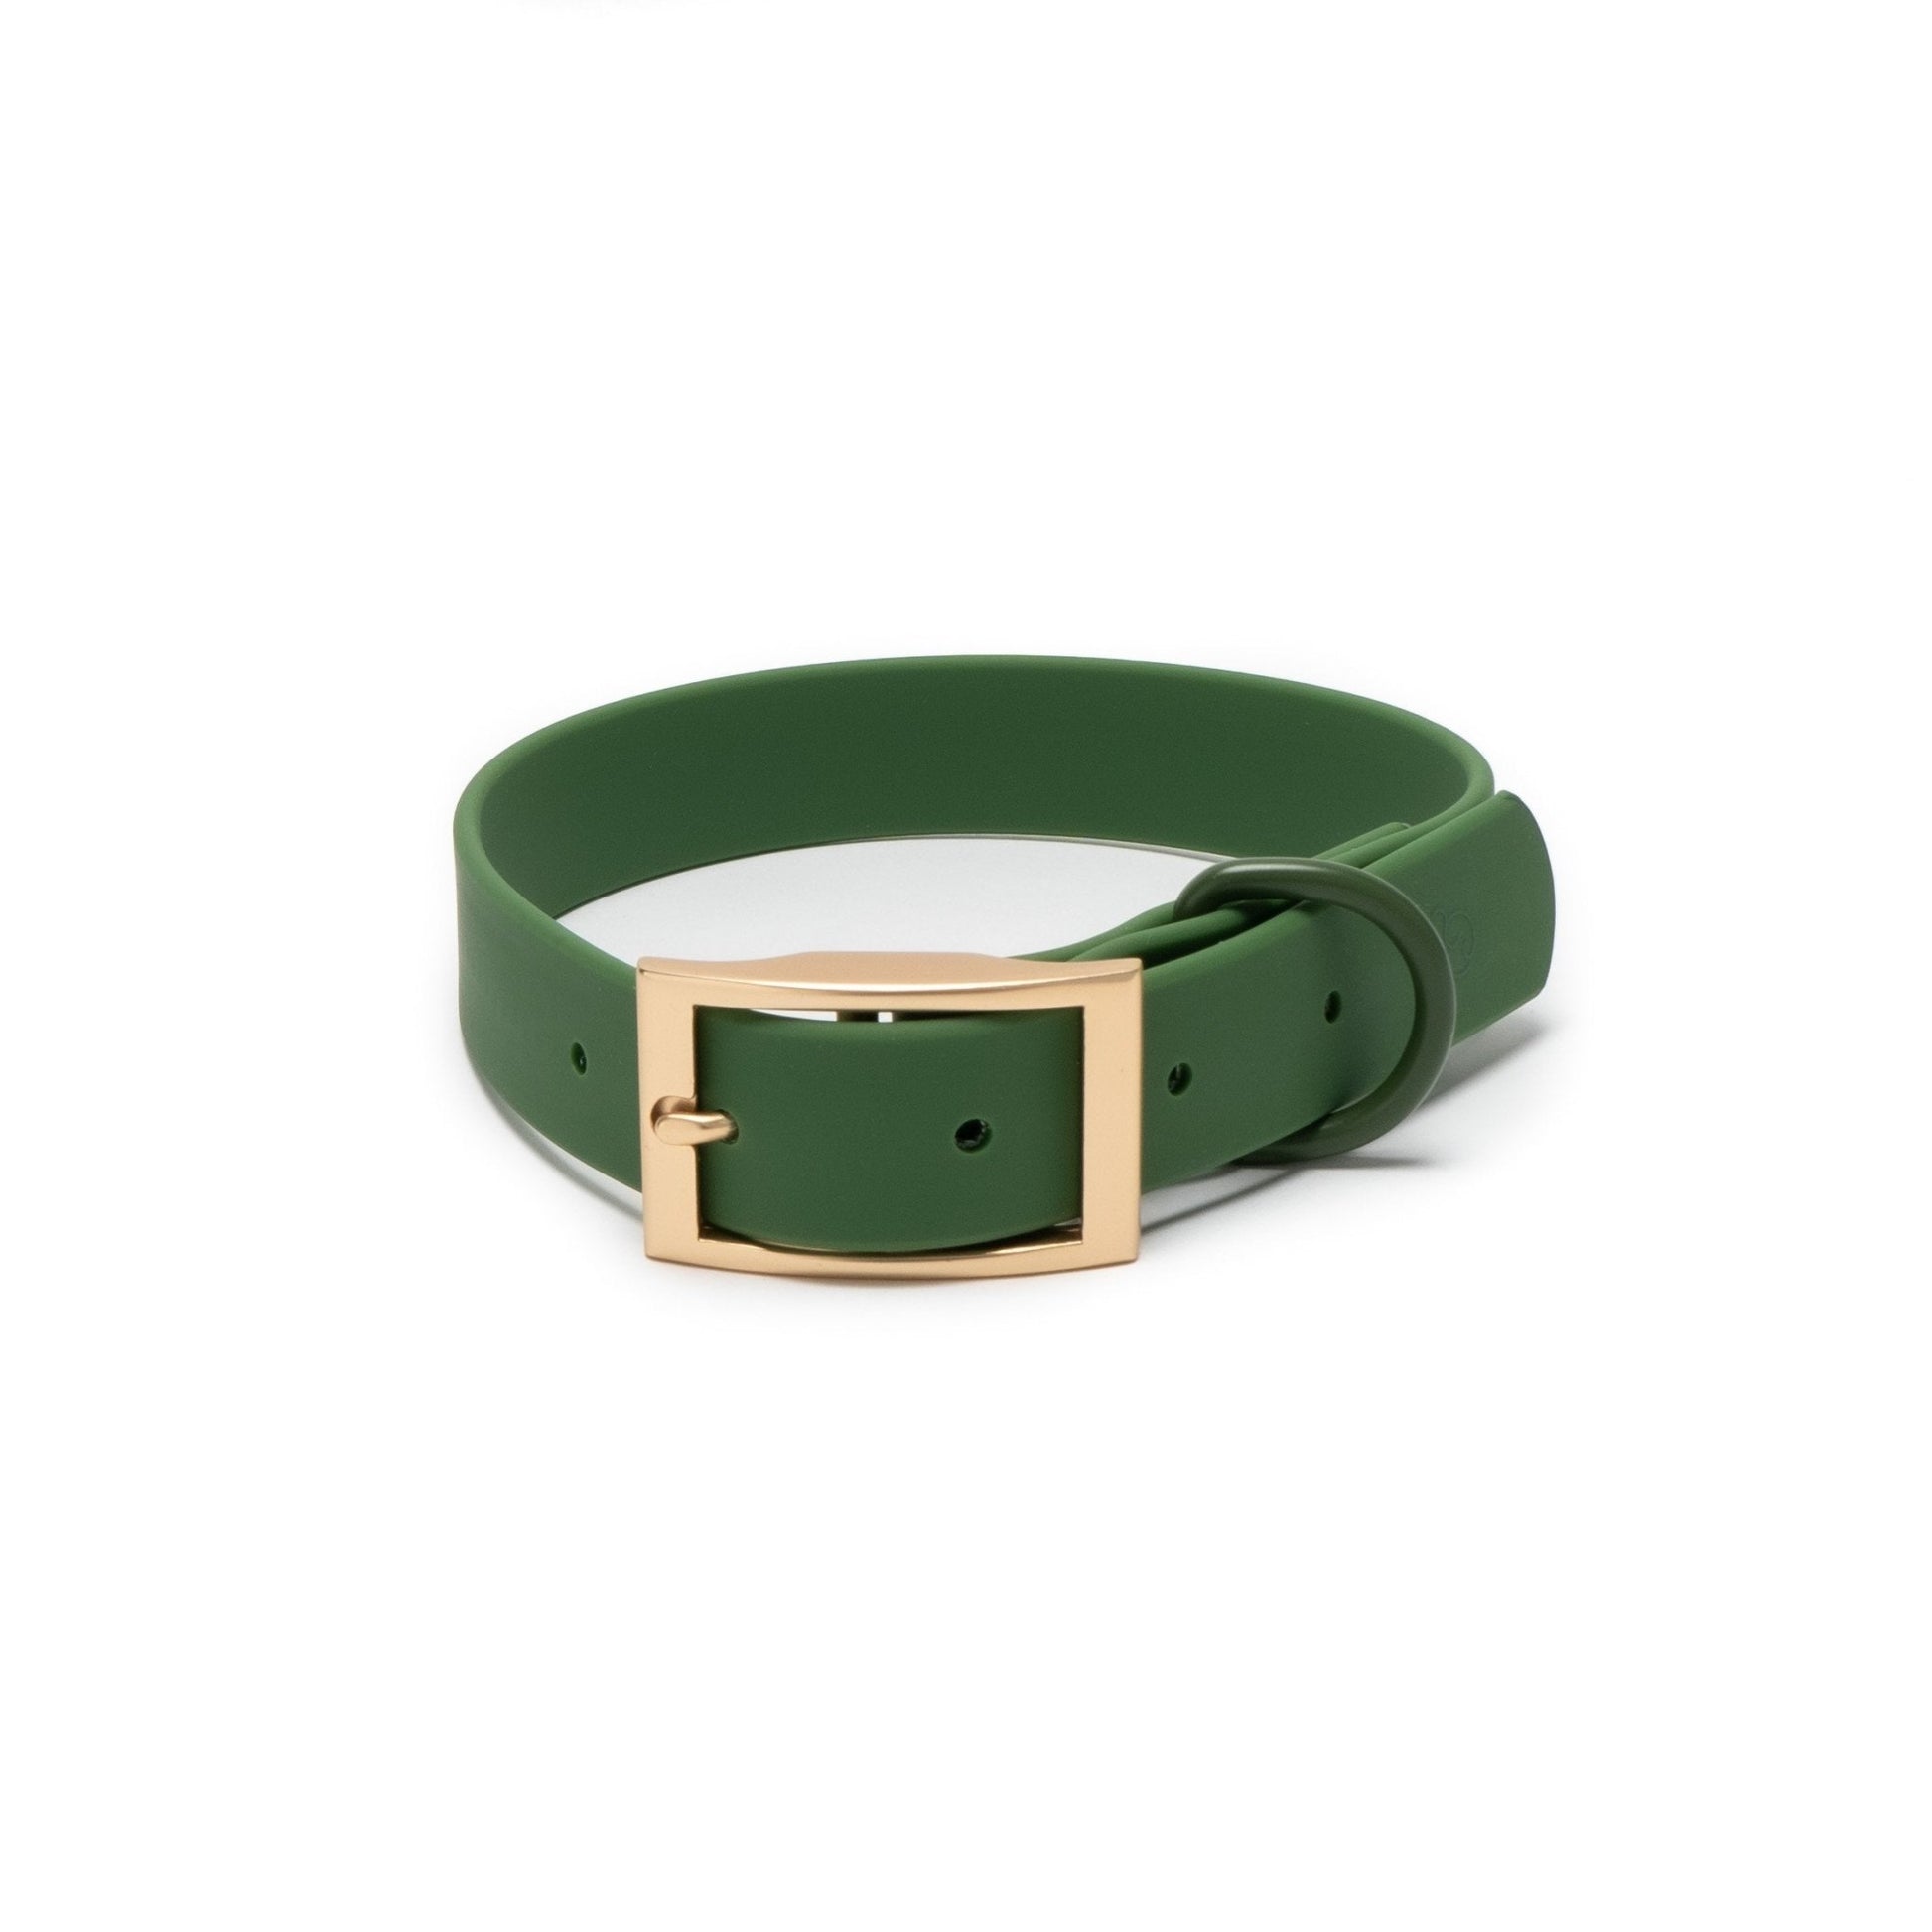 Lucy & Co. The Pine Everyday PVC Collar, Small, Green